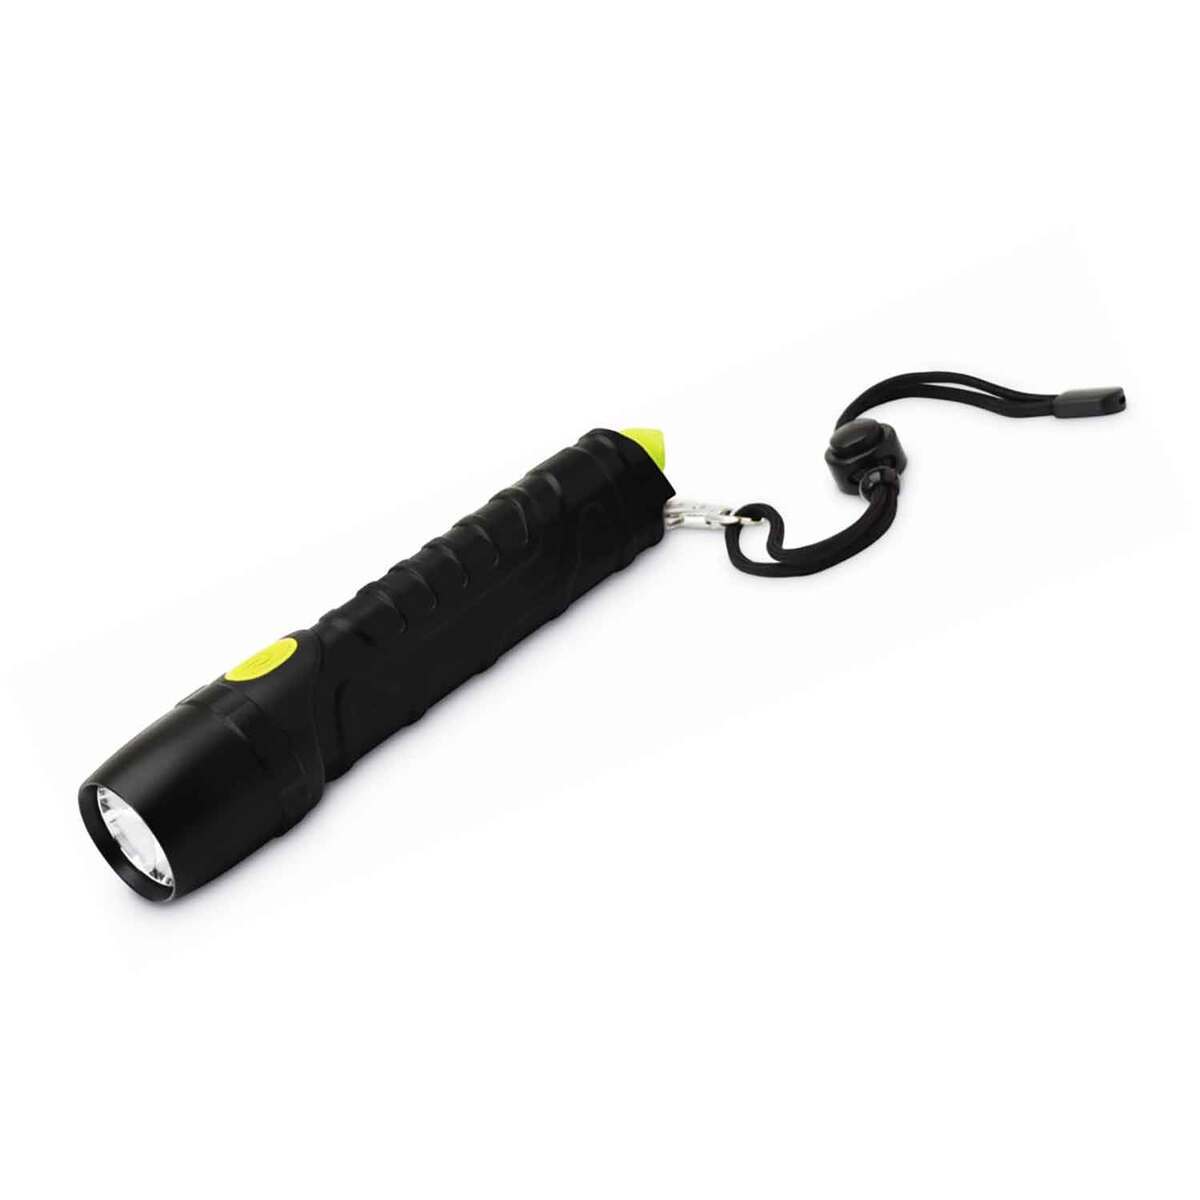 Core 1500 Lumen Cree LED Rechargeable Camping Emergency Flashlight